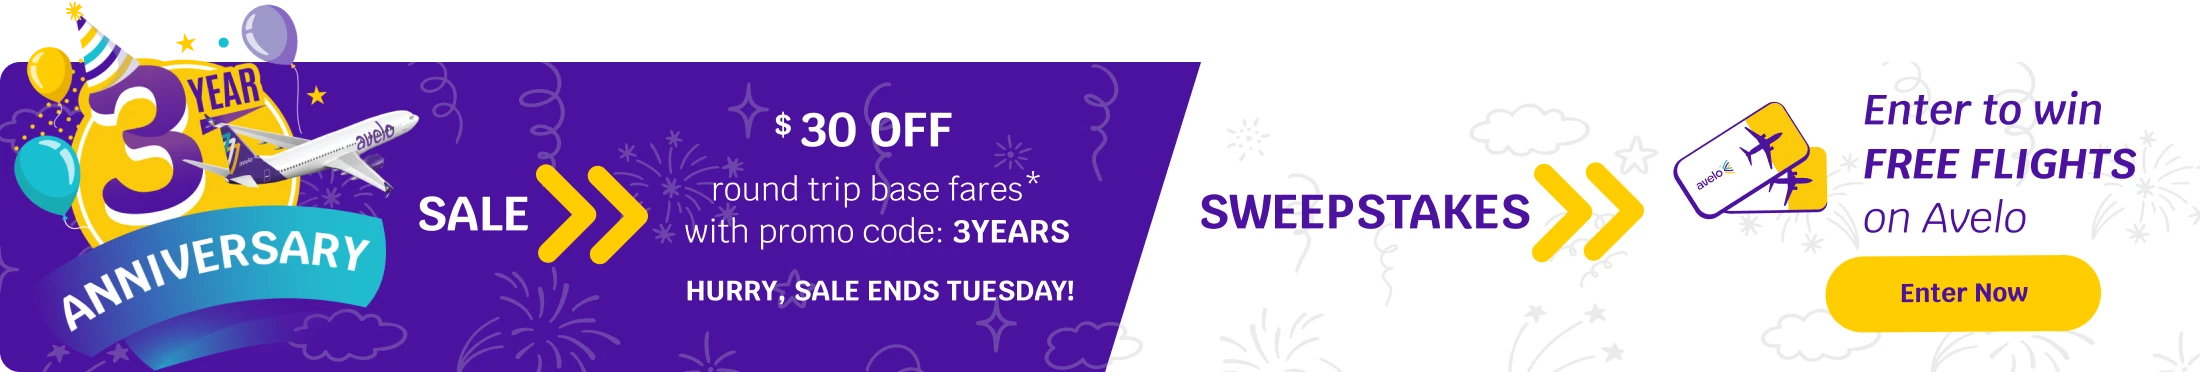 3 Year Anniversary SALE $30 off round trip base fares* with promo code: 3YEARS HURRY, SALE ENDS TUESDAY!